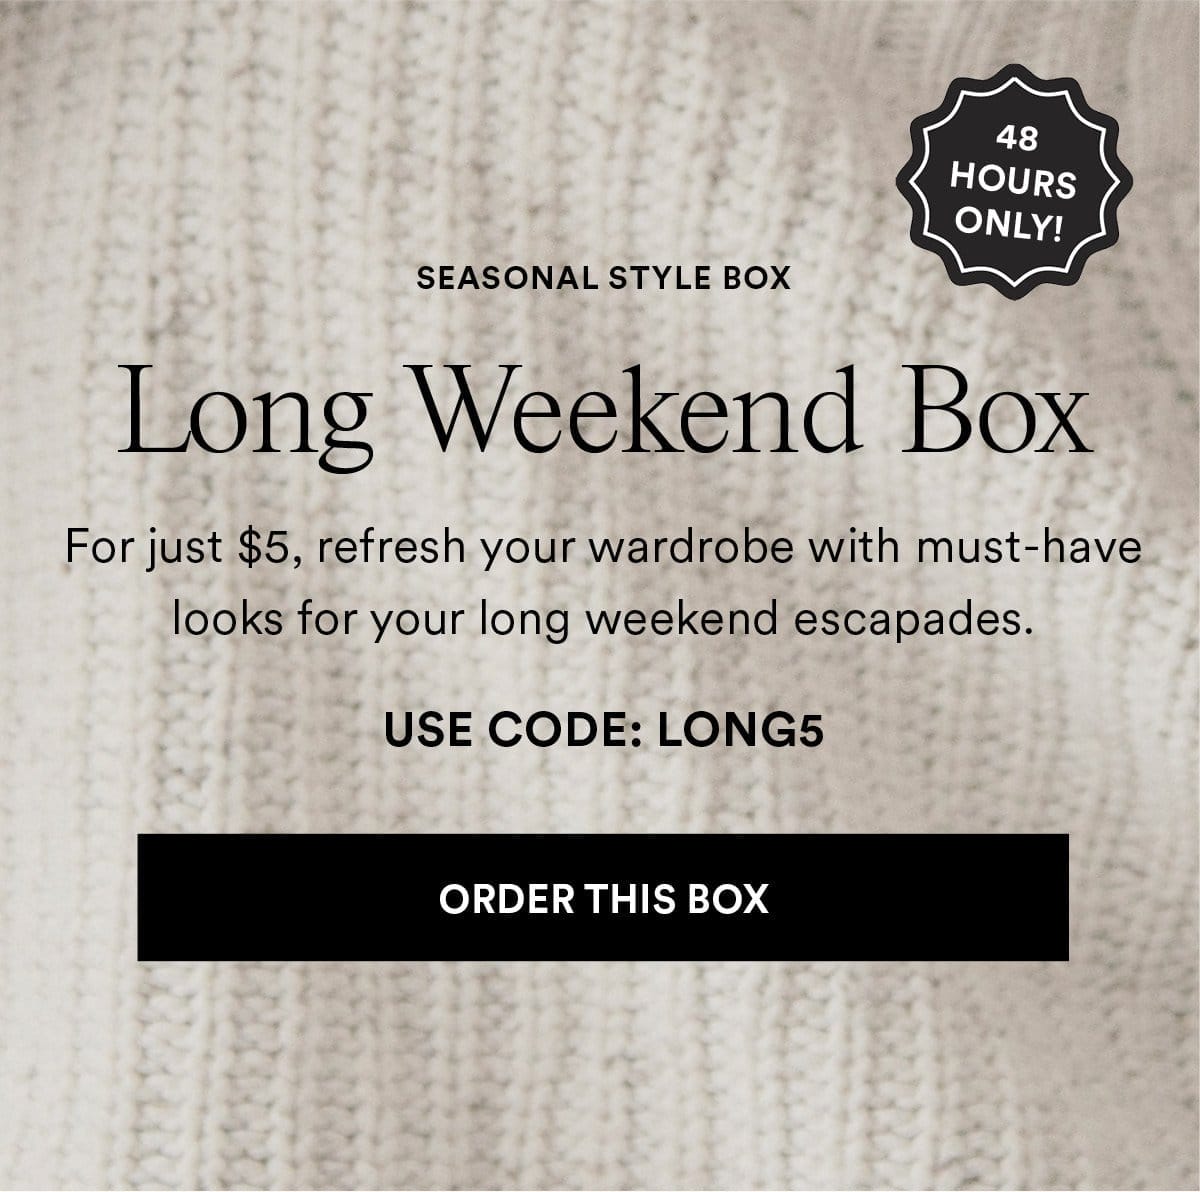 Long Weekend Box. For just \\$5, refresh your wardrobe with must-have looks for your long weekend escapades. USE CODE: LONG5 Order This Box